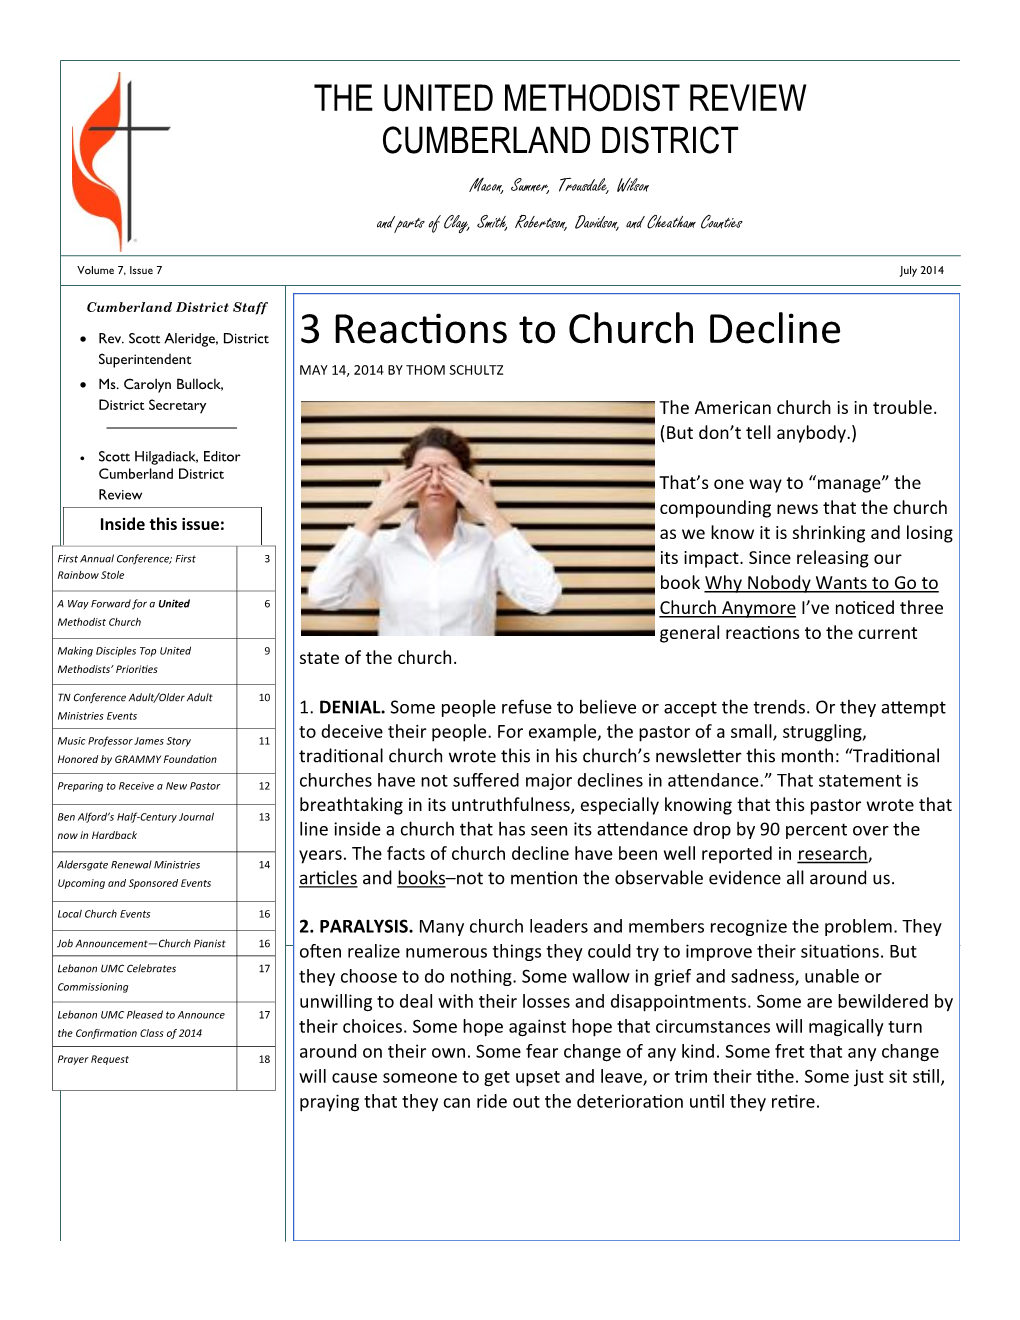 3 Reactions to Church Decline Superintendent MAY 14, 2014 by THOM SCHULTZ  Ms